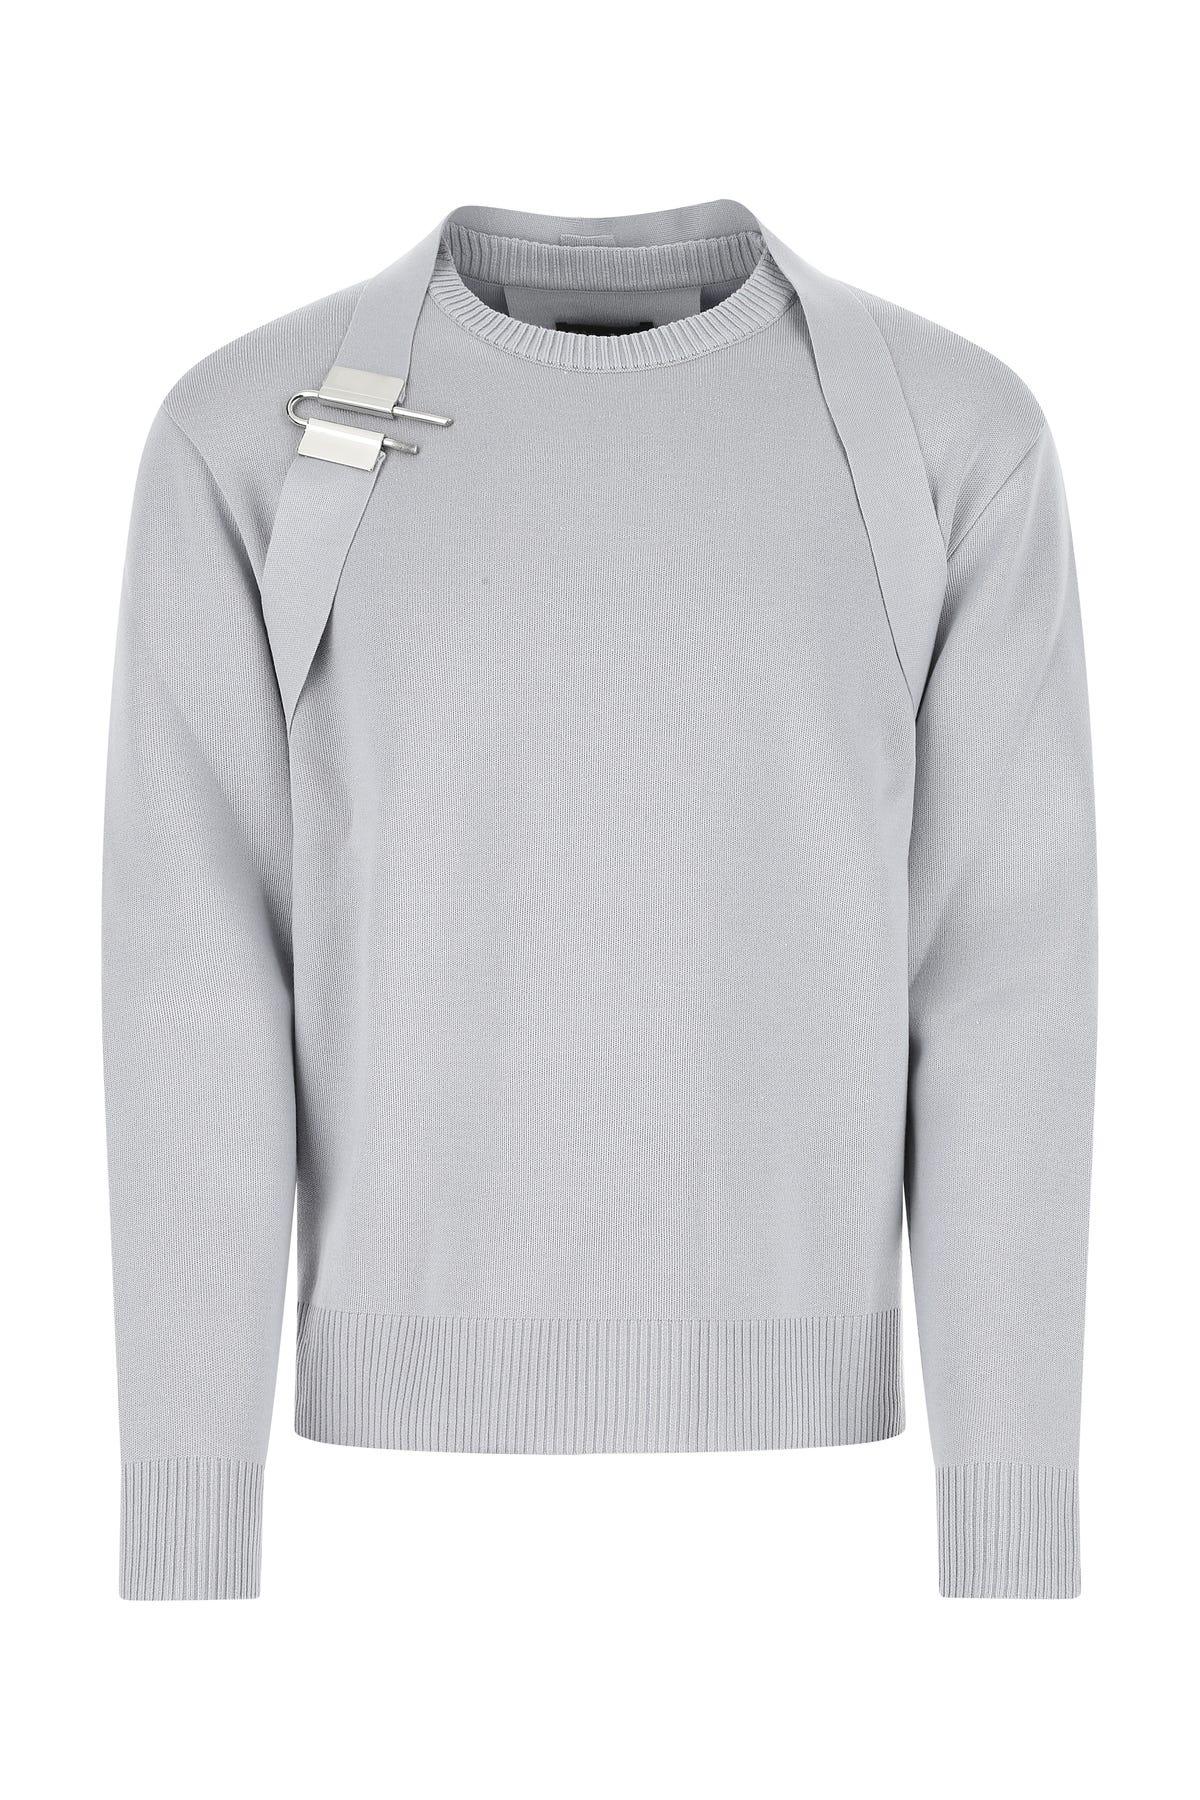 Givenchy Padlock Harness Sweater in Gray for Men | Lyst